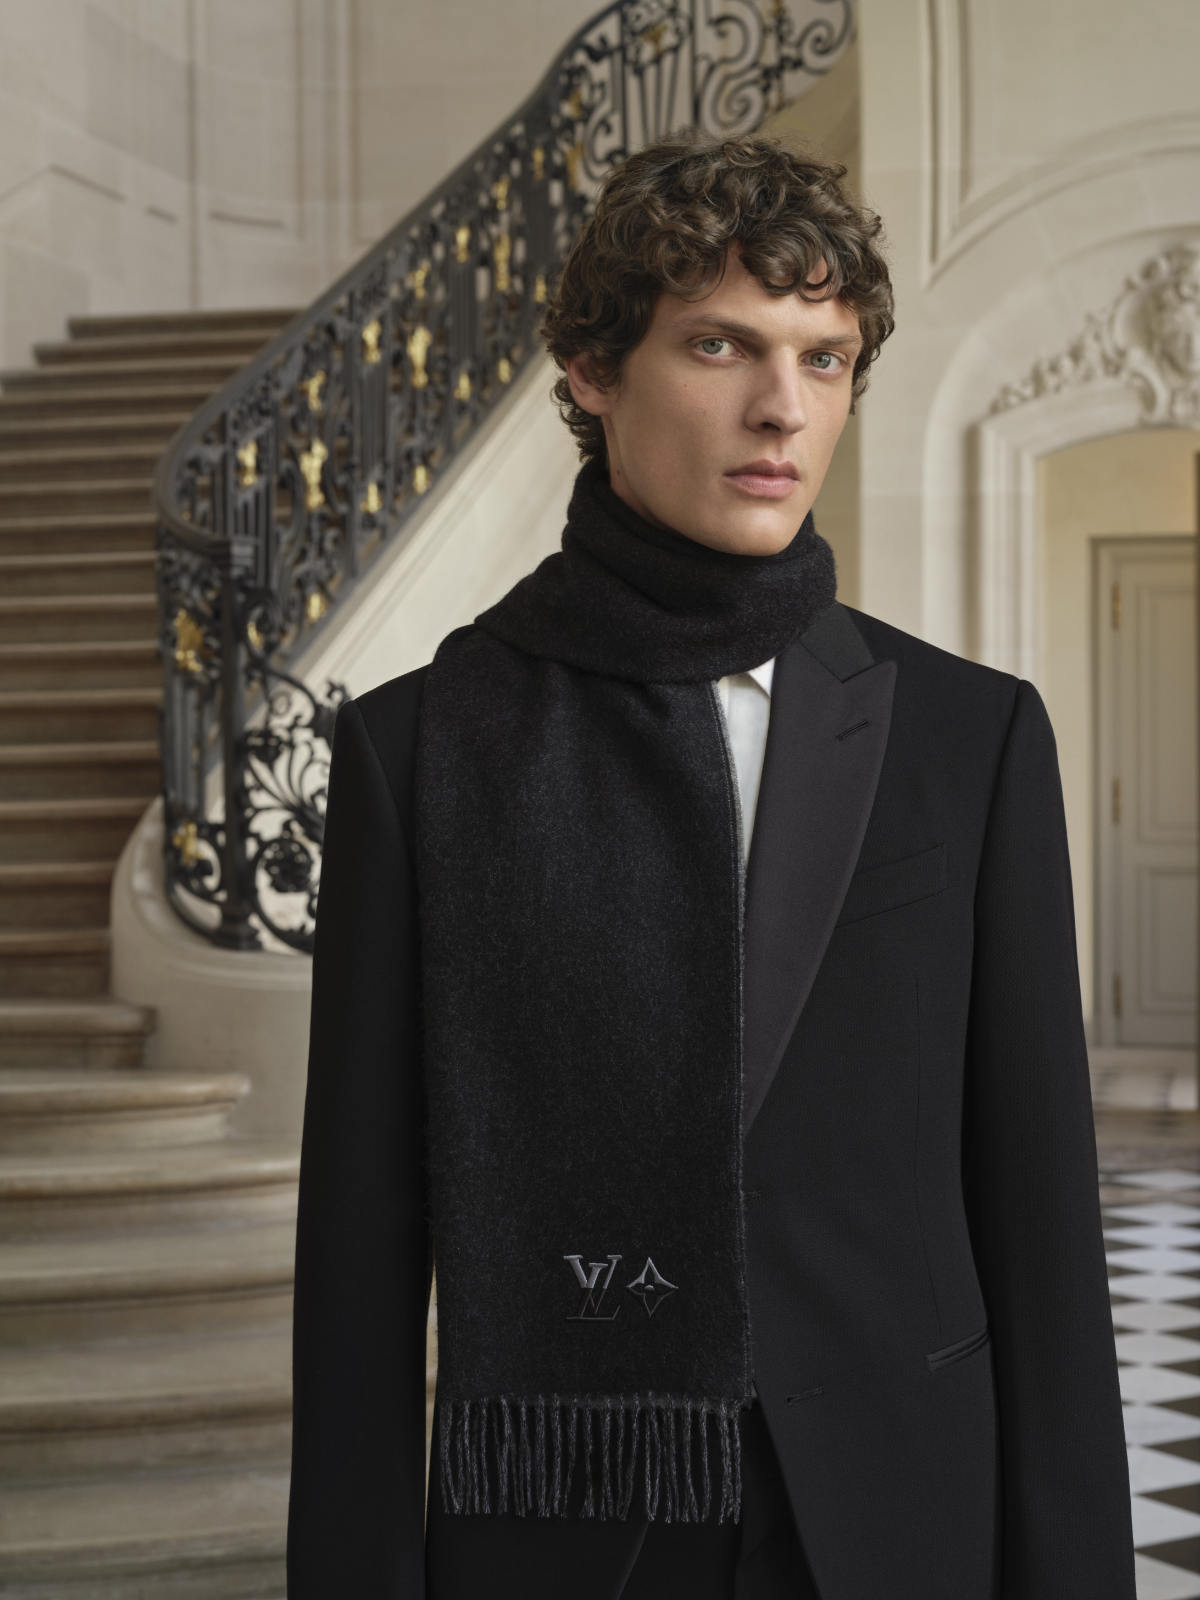 The Louis Vuitton man is on the move with Aerogram Collection – Yakymour